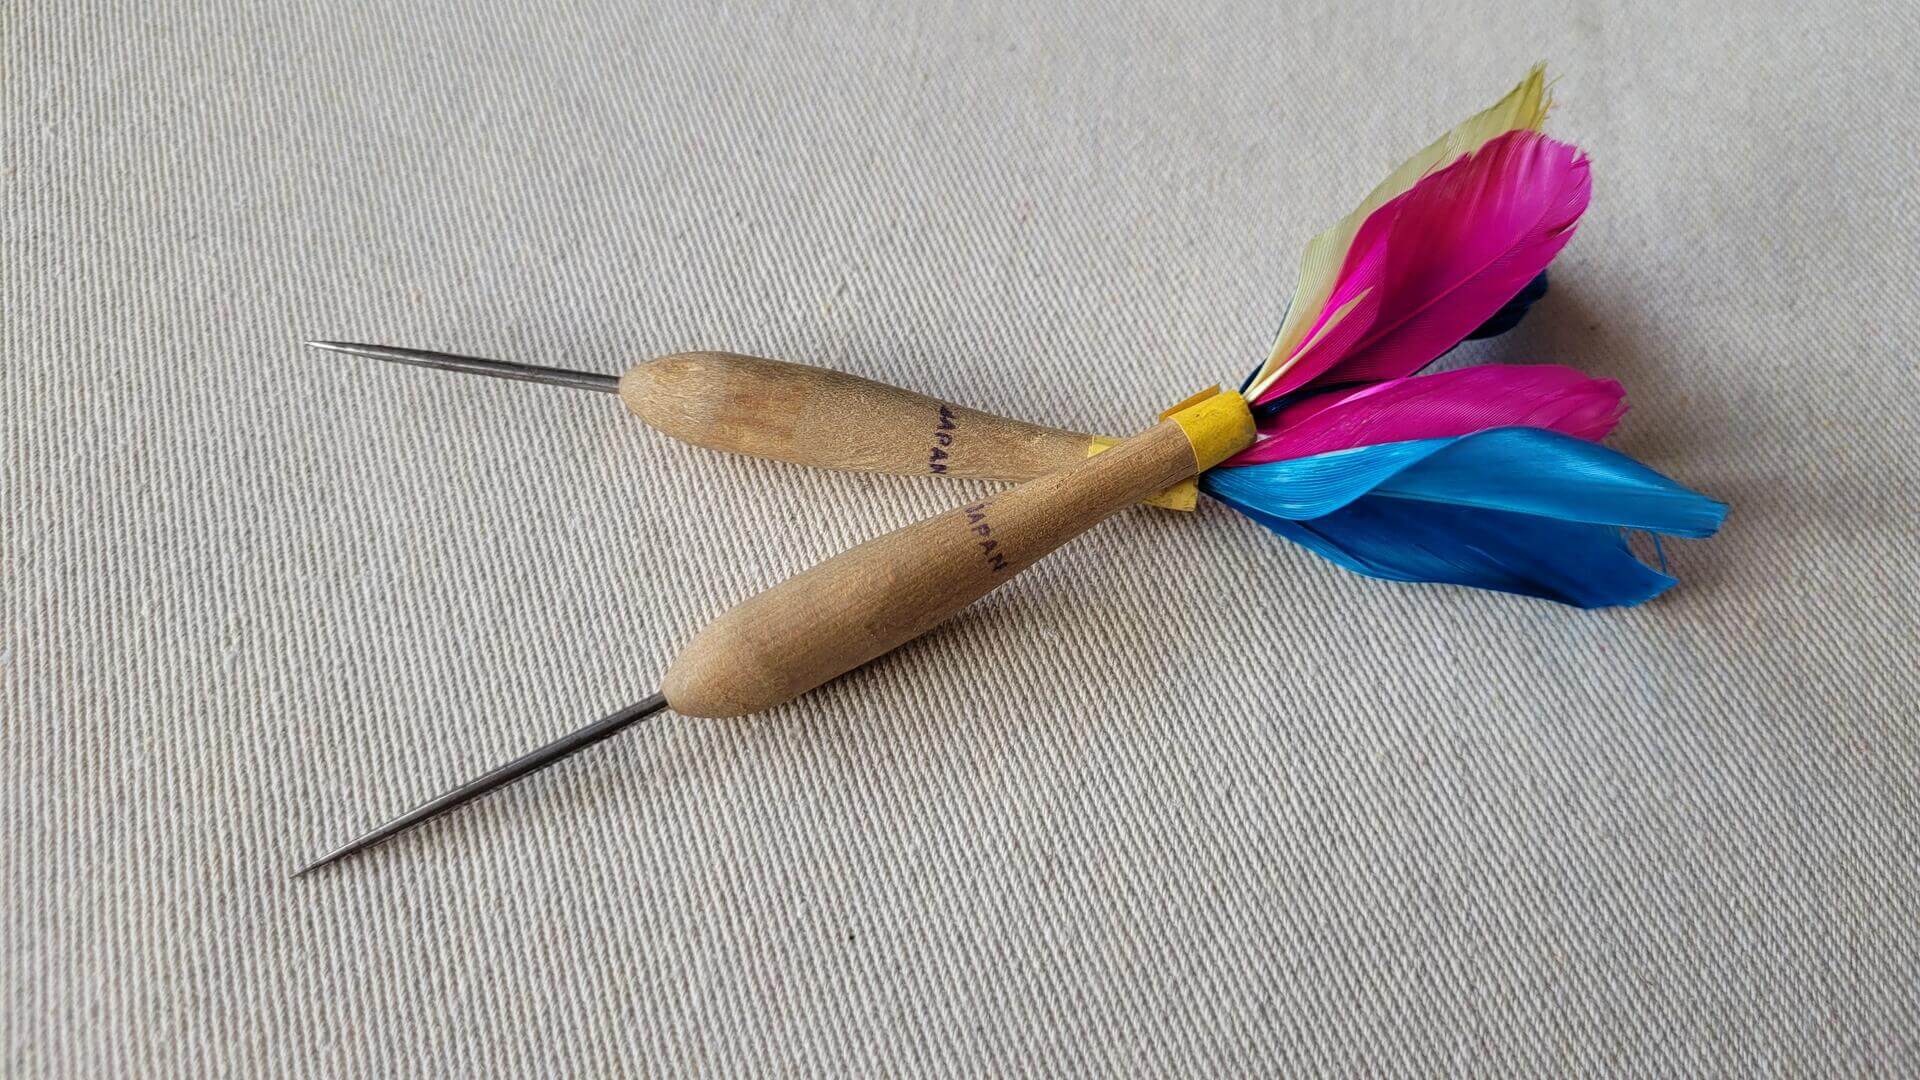 Rare set of 5 mid century wooden shafted natural feather darts with the steel tip. Vintage made in Japan collectible sporting goods & darts memorabilia